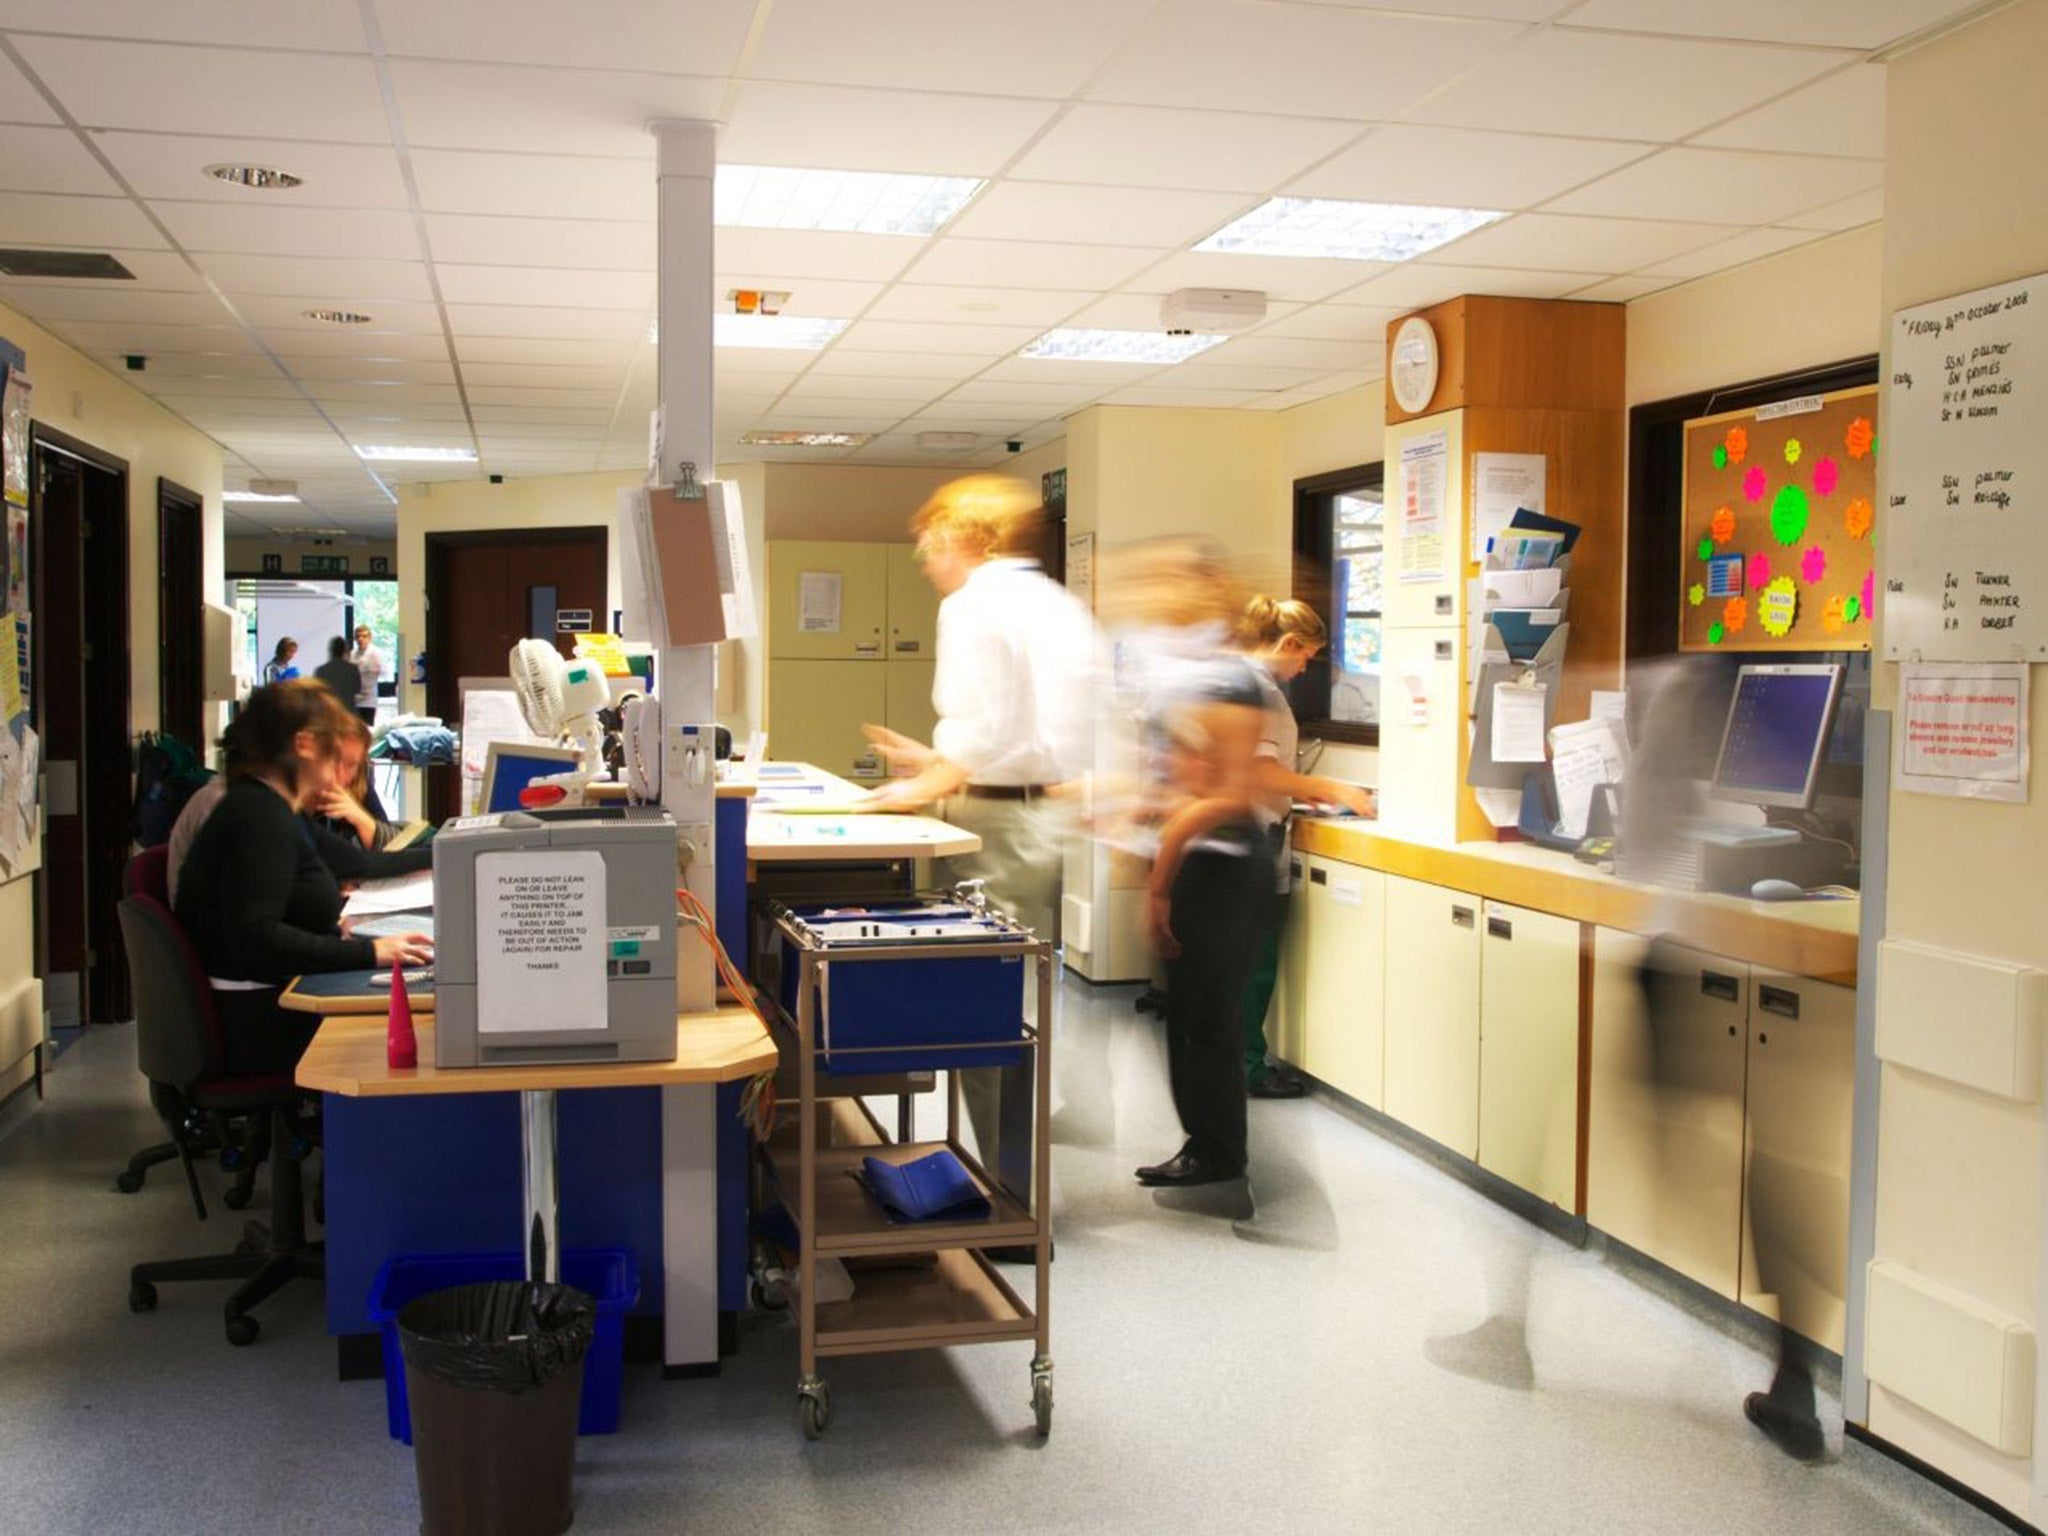 Staff work in a busy NHS surgery